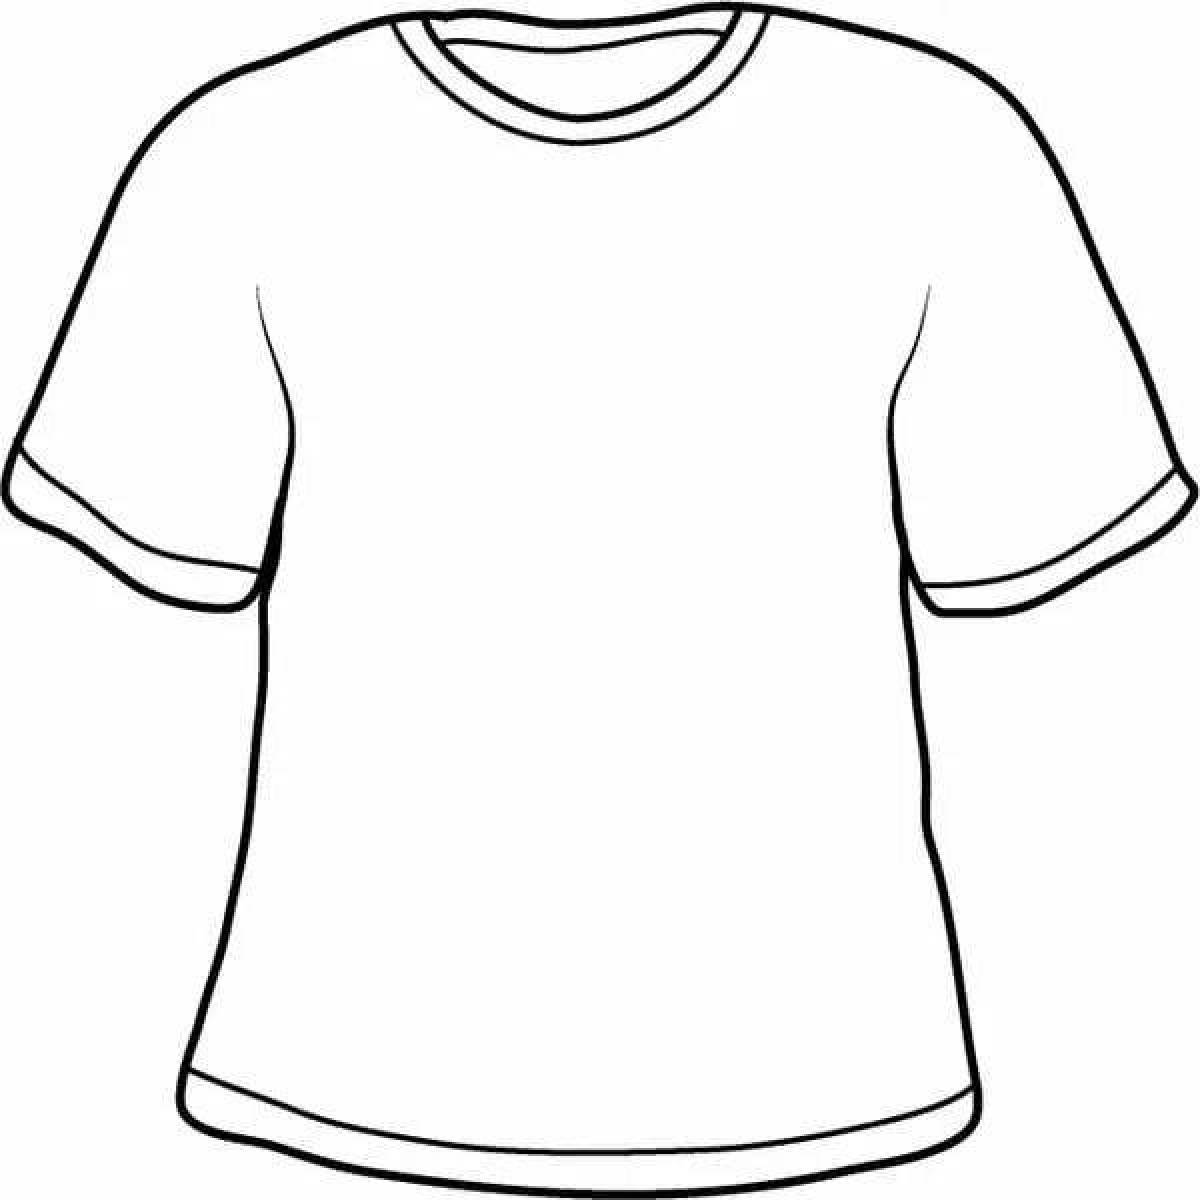 Comic T-shirt coloring page